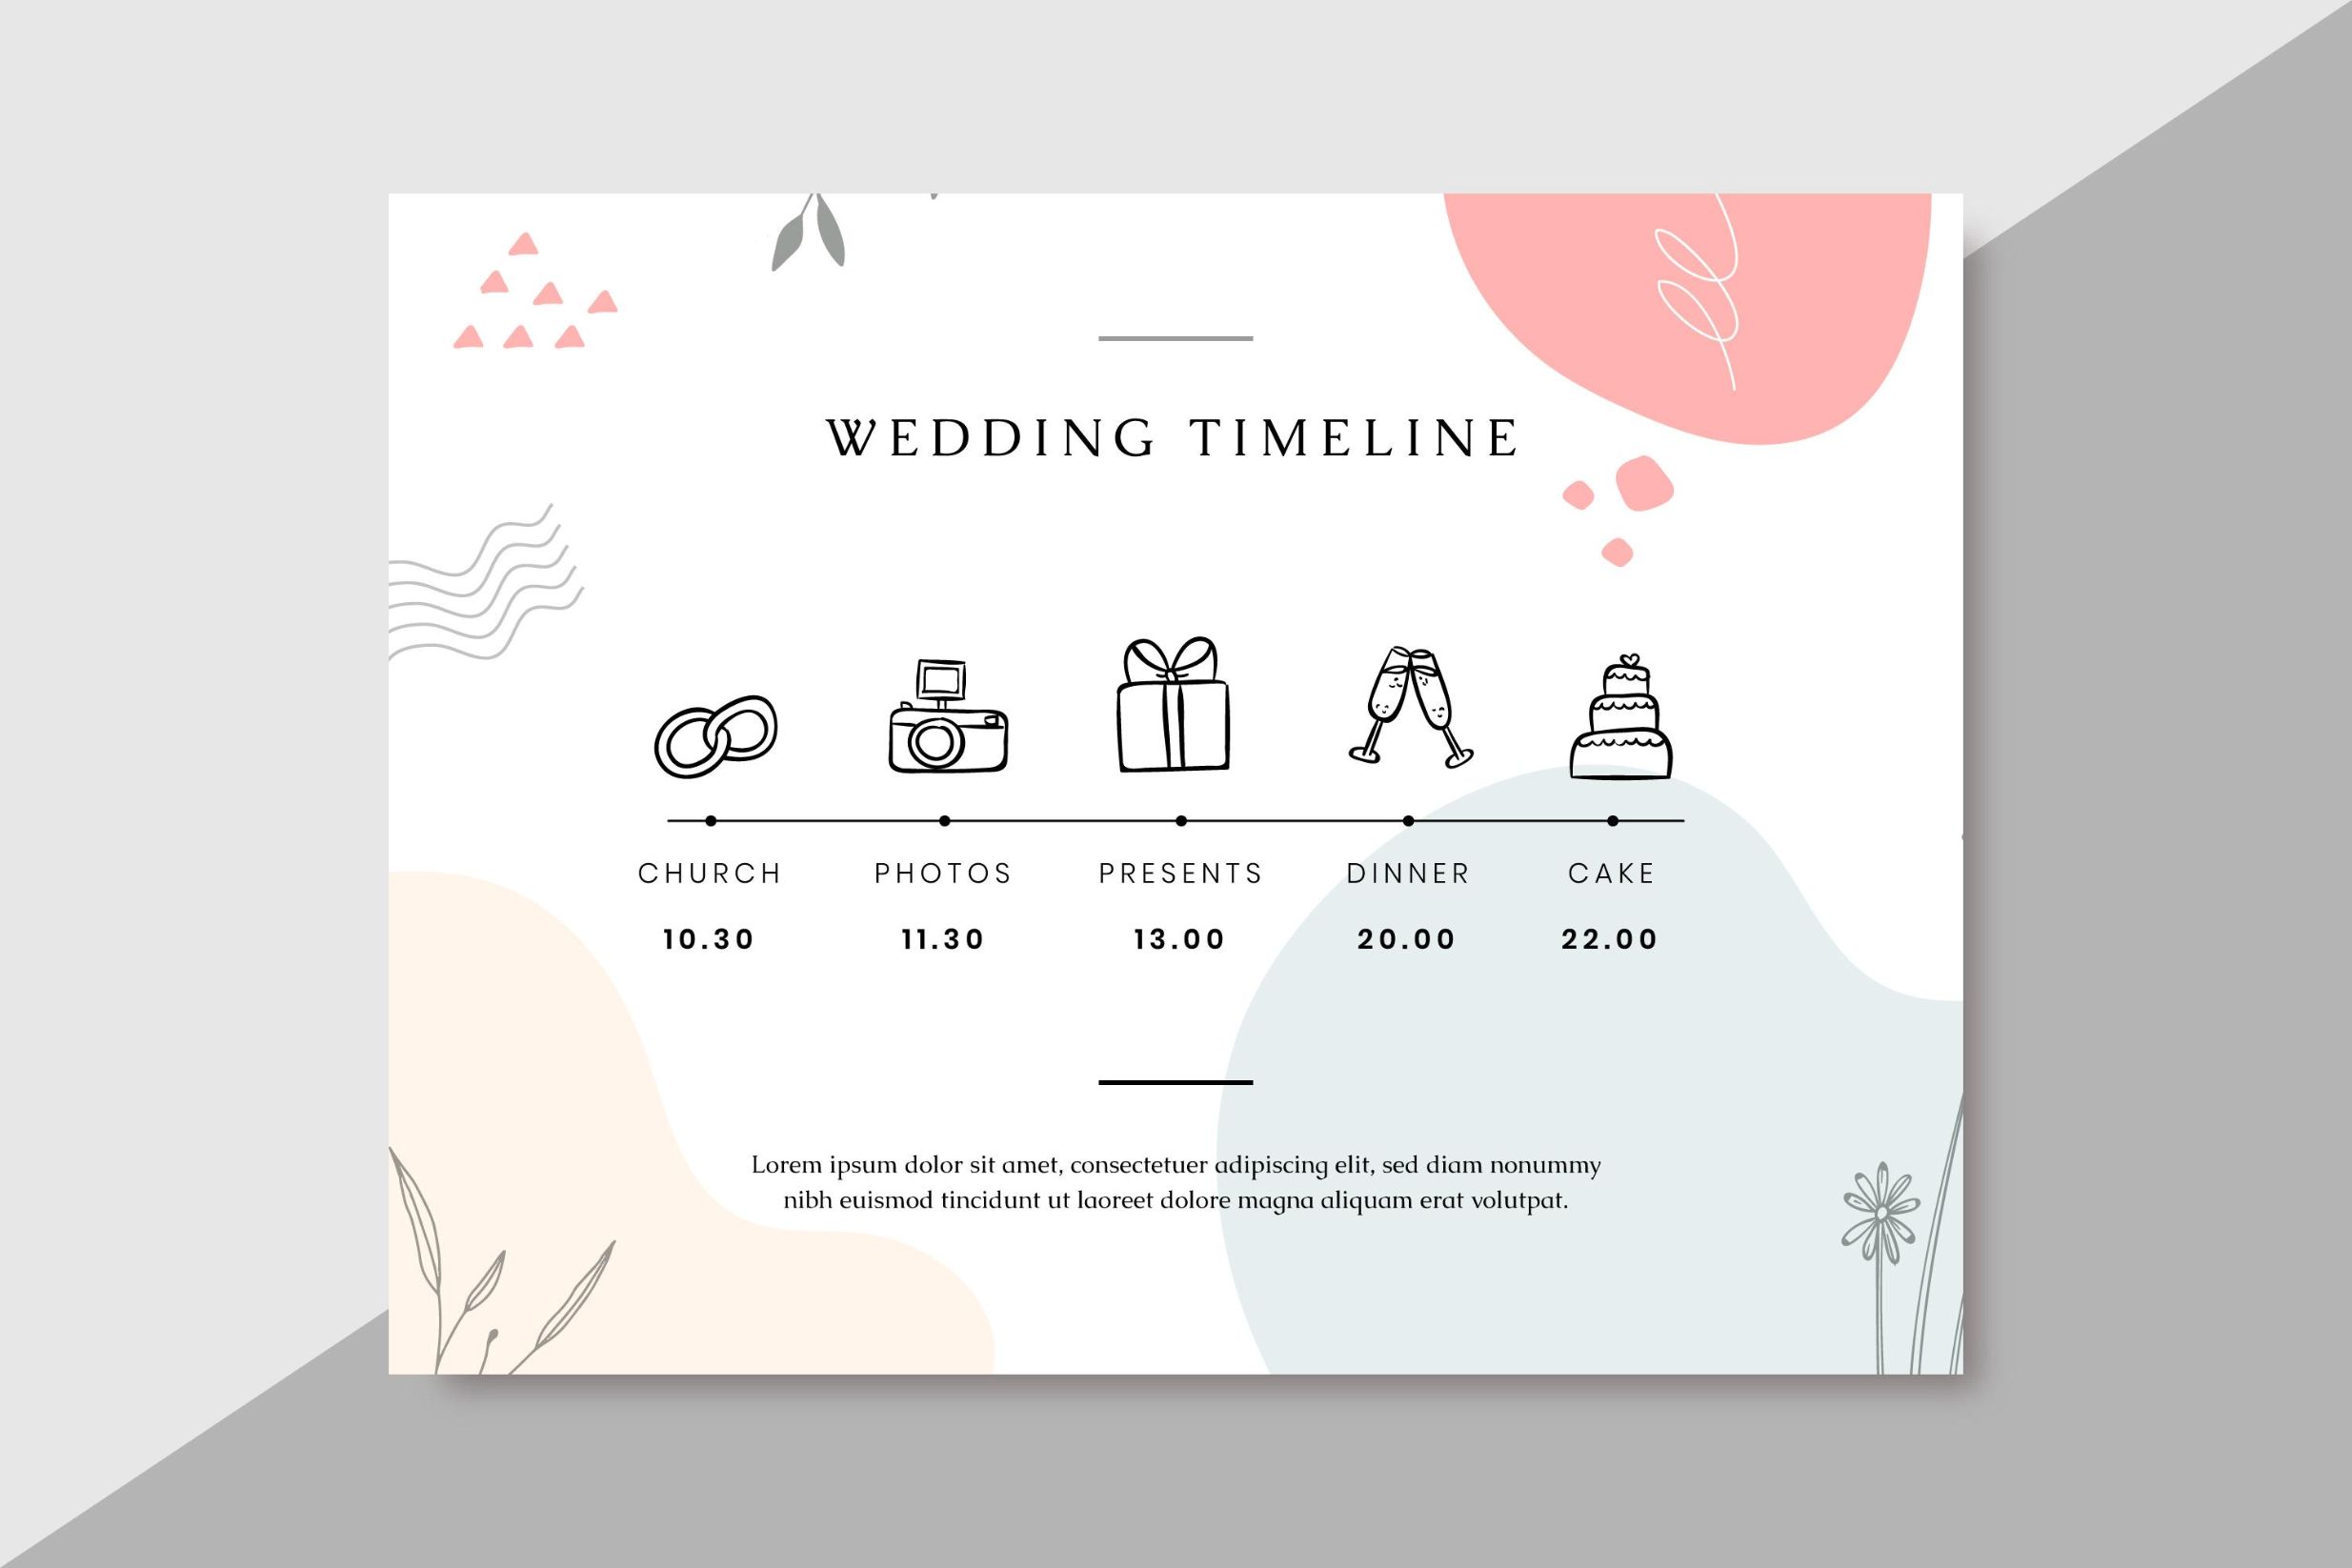 2.-Wedding-invitation-message-–-the-information-that-is-usually-mentioned_wedding-timeline